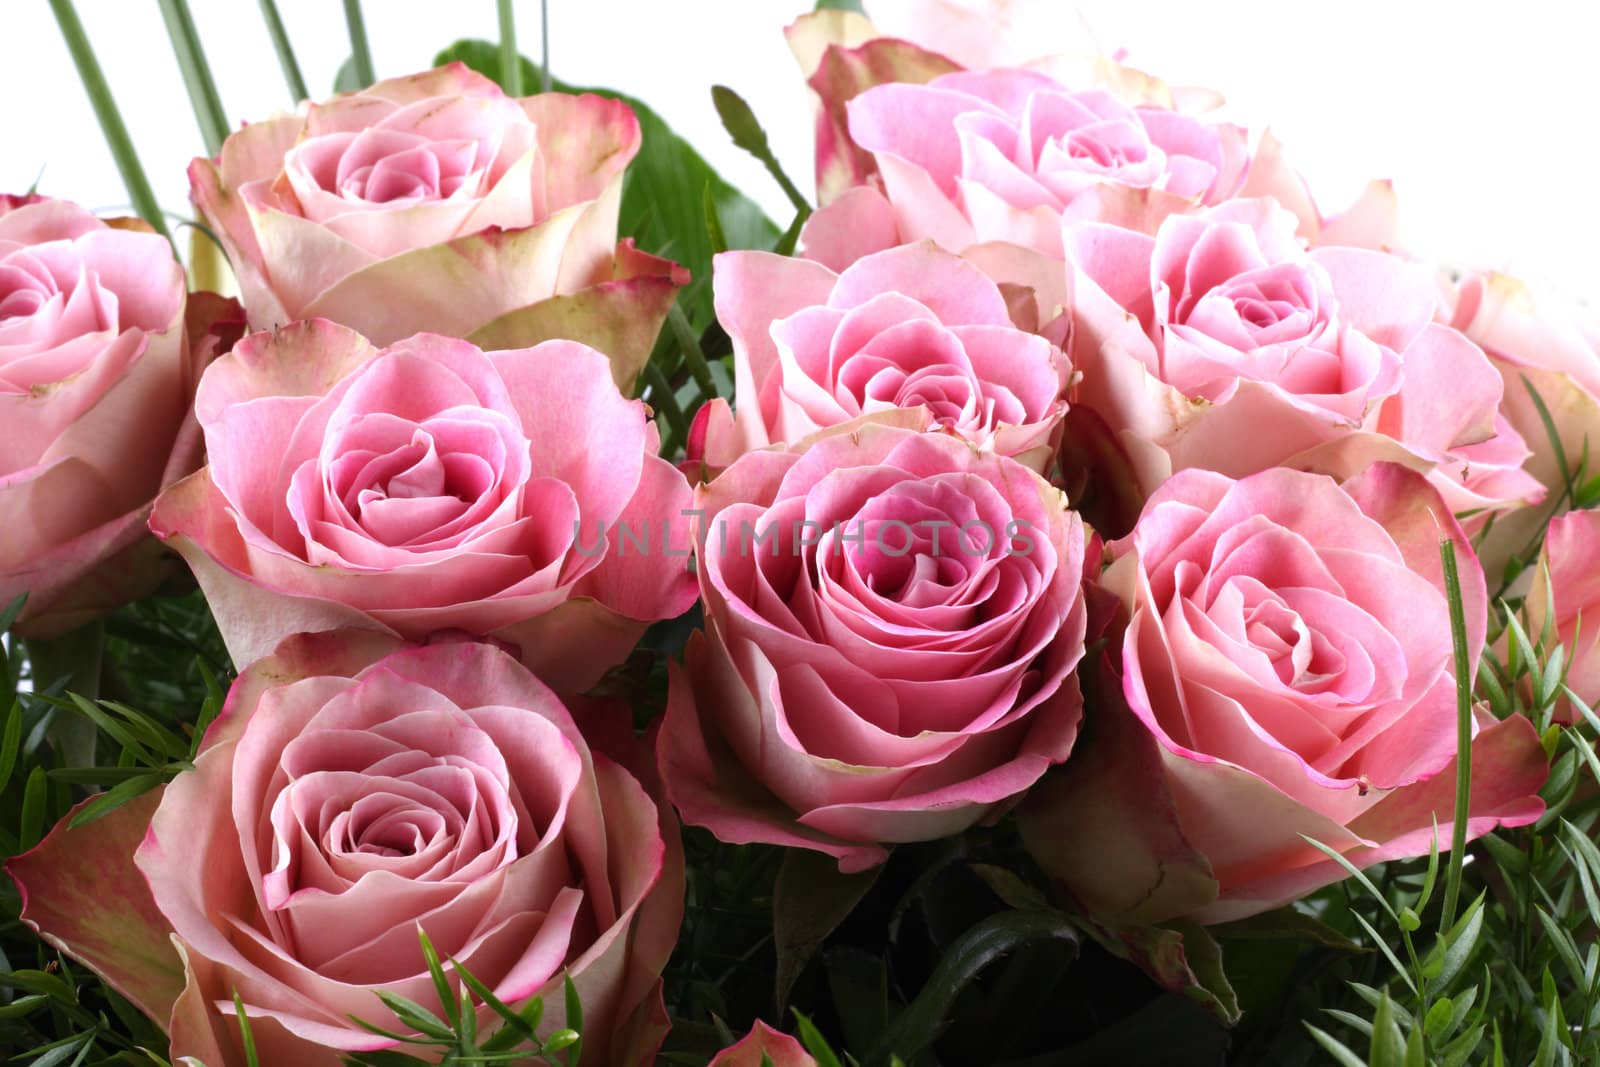 bouquet of pink roses by Hoomar